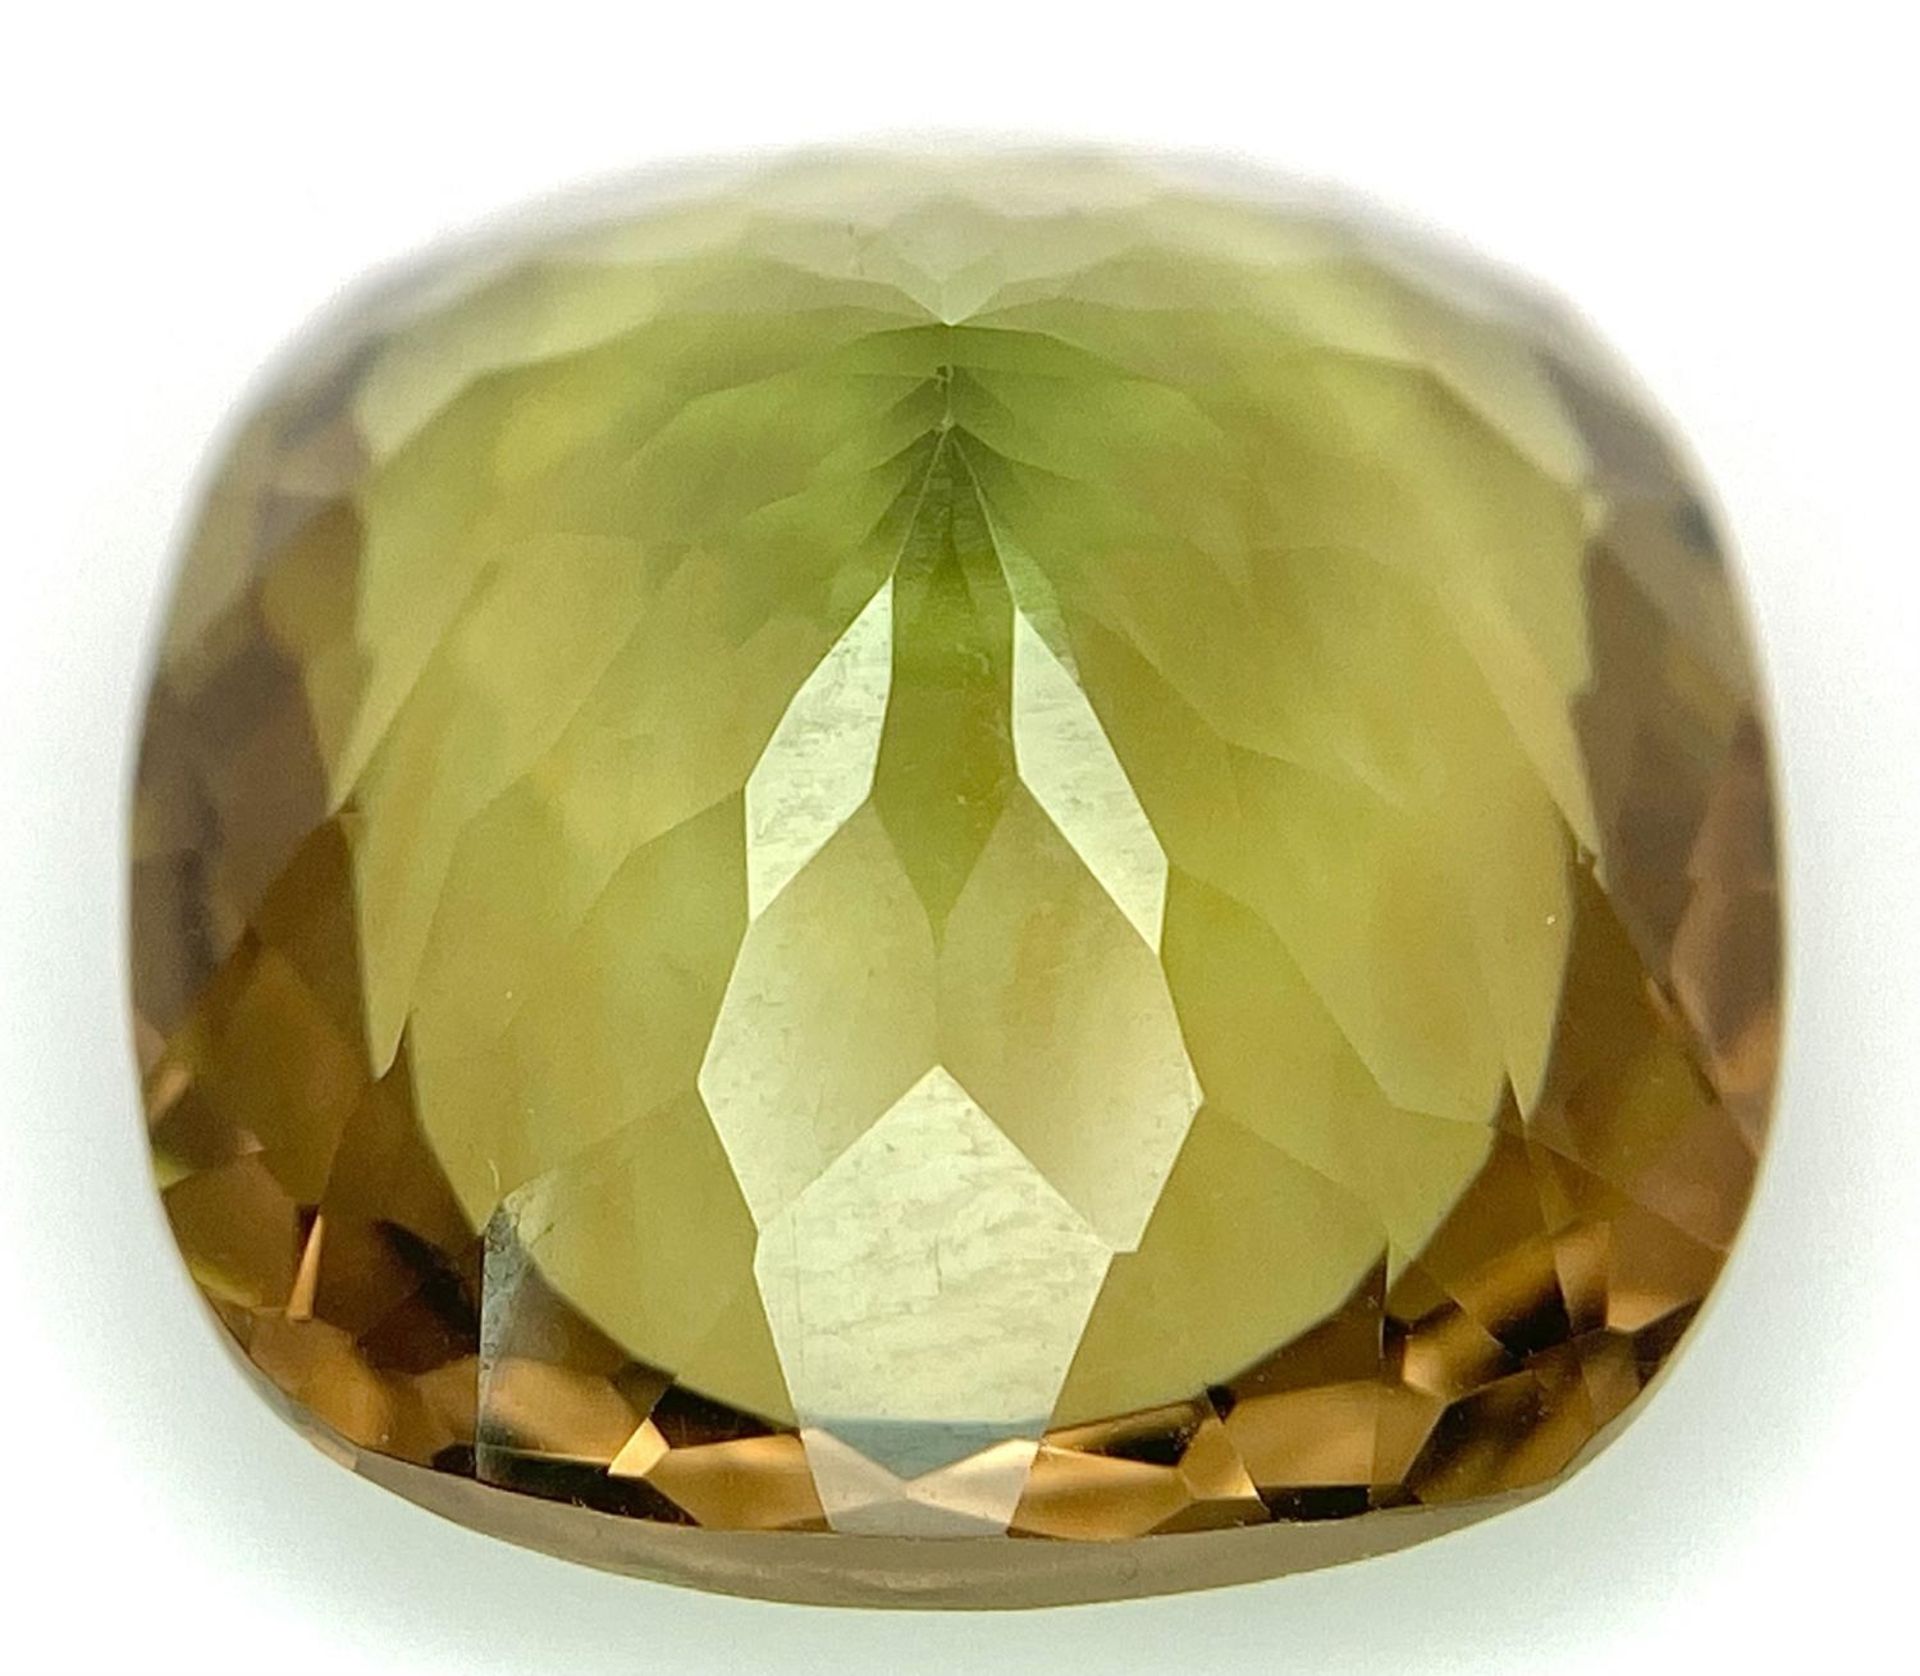 A 19ct Pale Green Prasiolite Gemstone. Cushion cut. No visible marks or inclusions. No certificate - Image 3 of 4